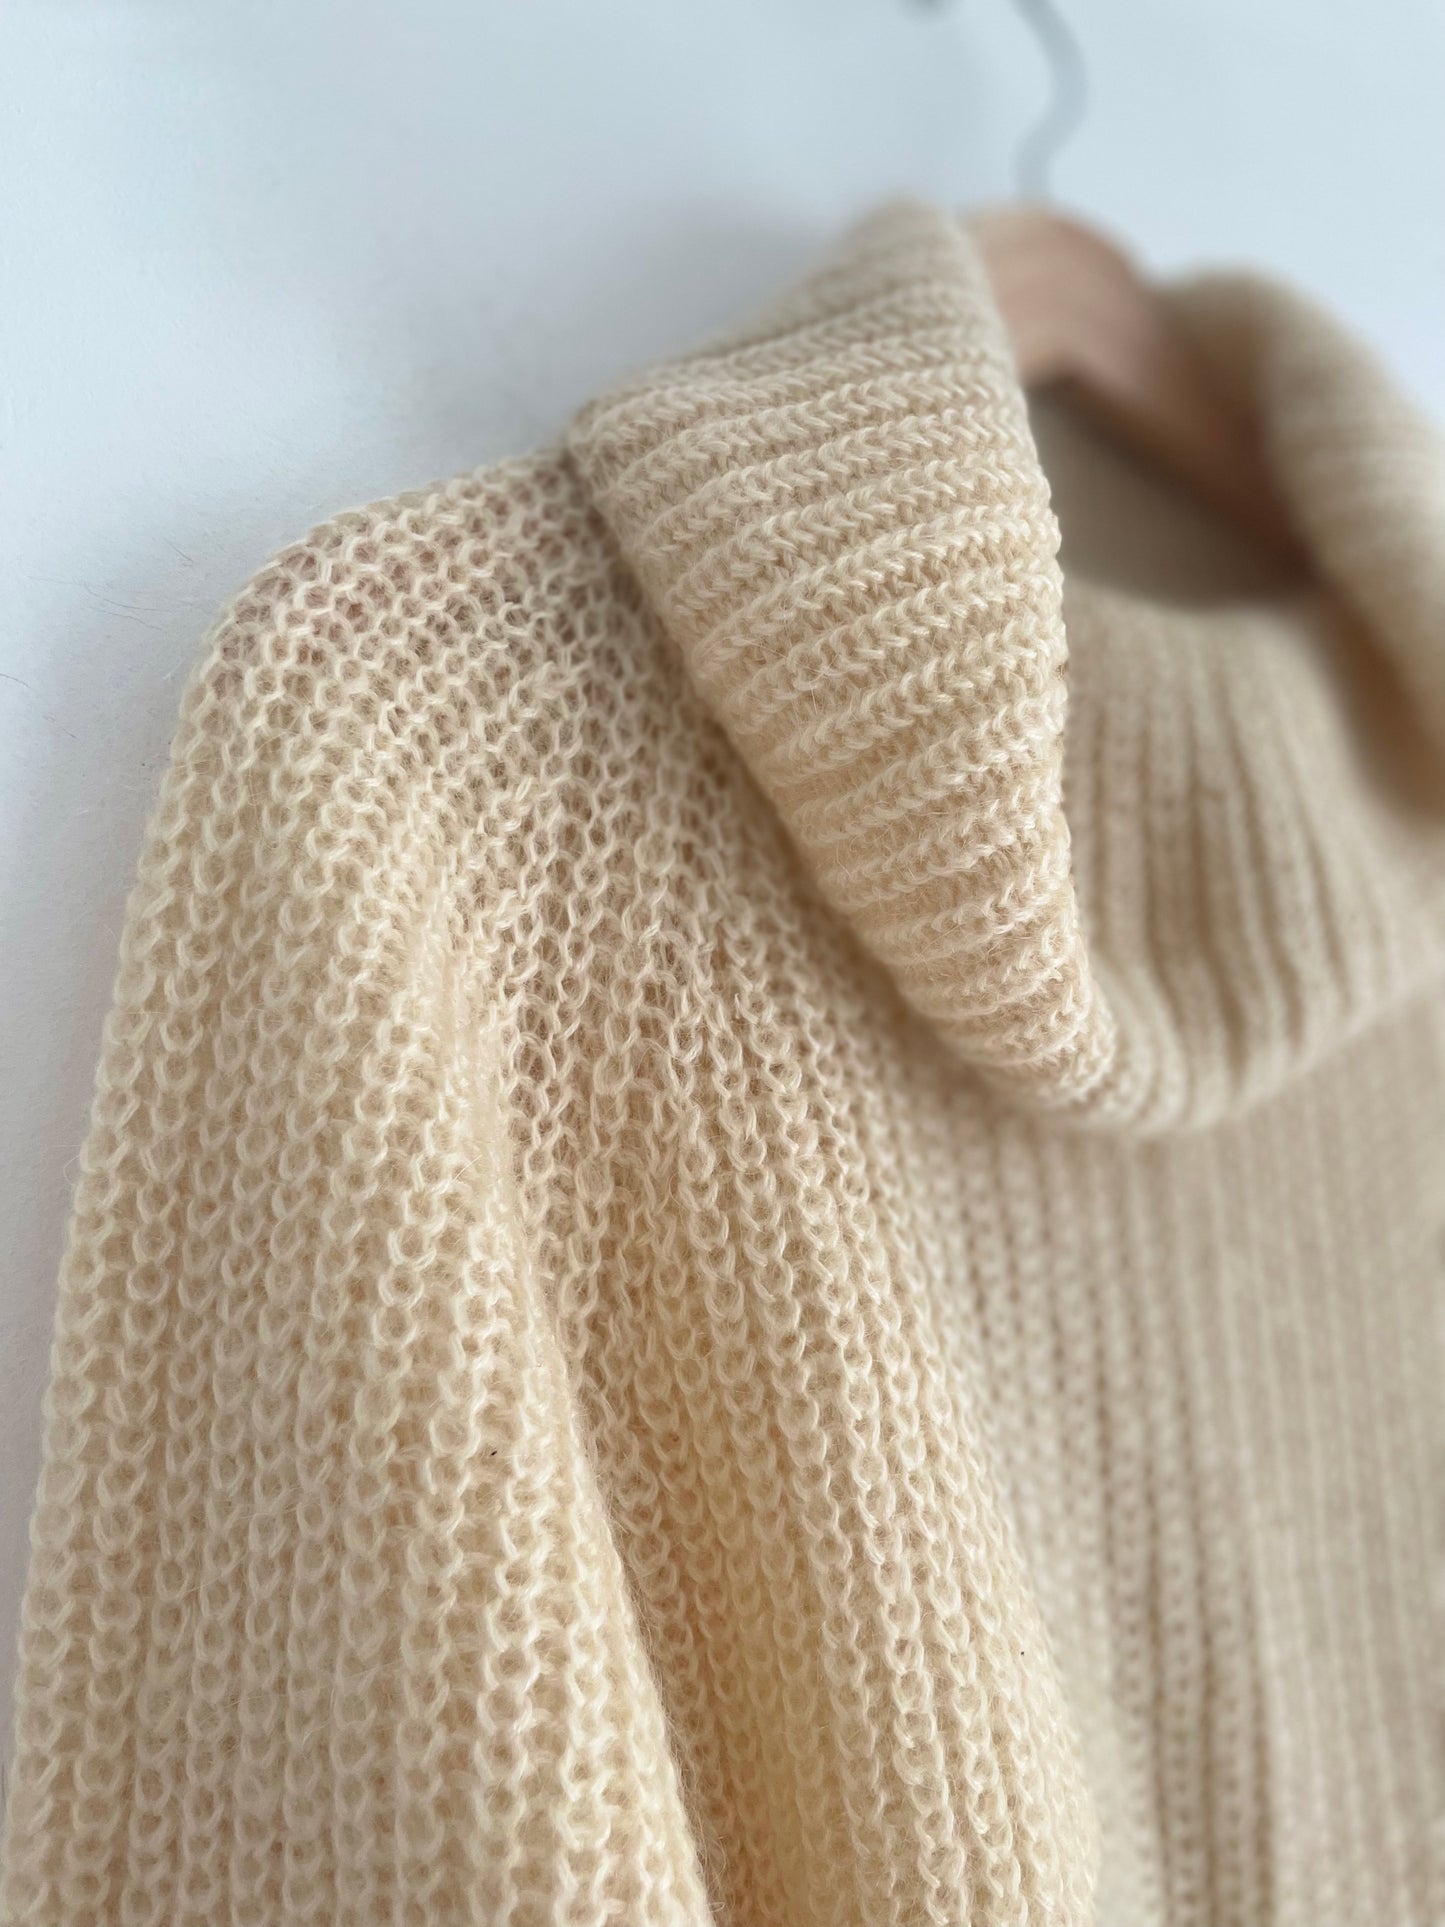 Mohair Ivory Sweater | Large